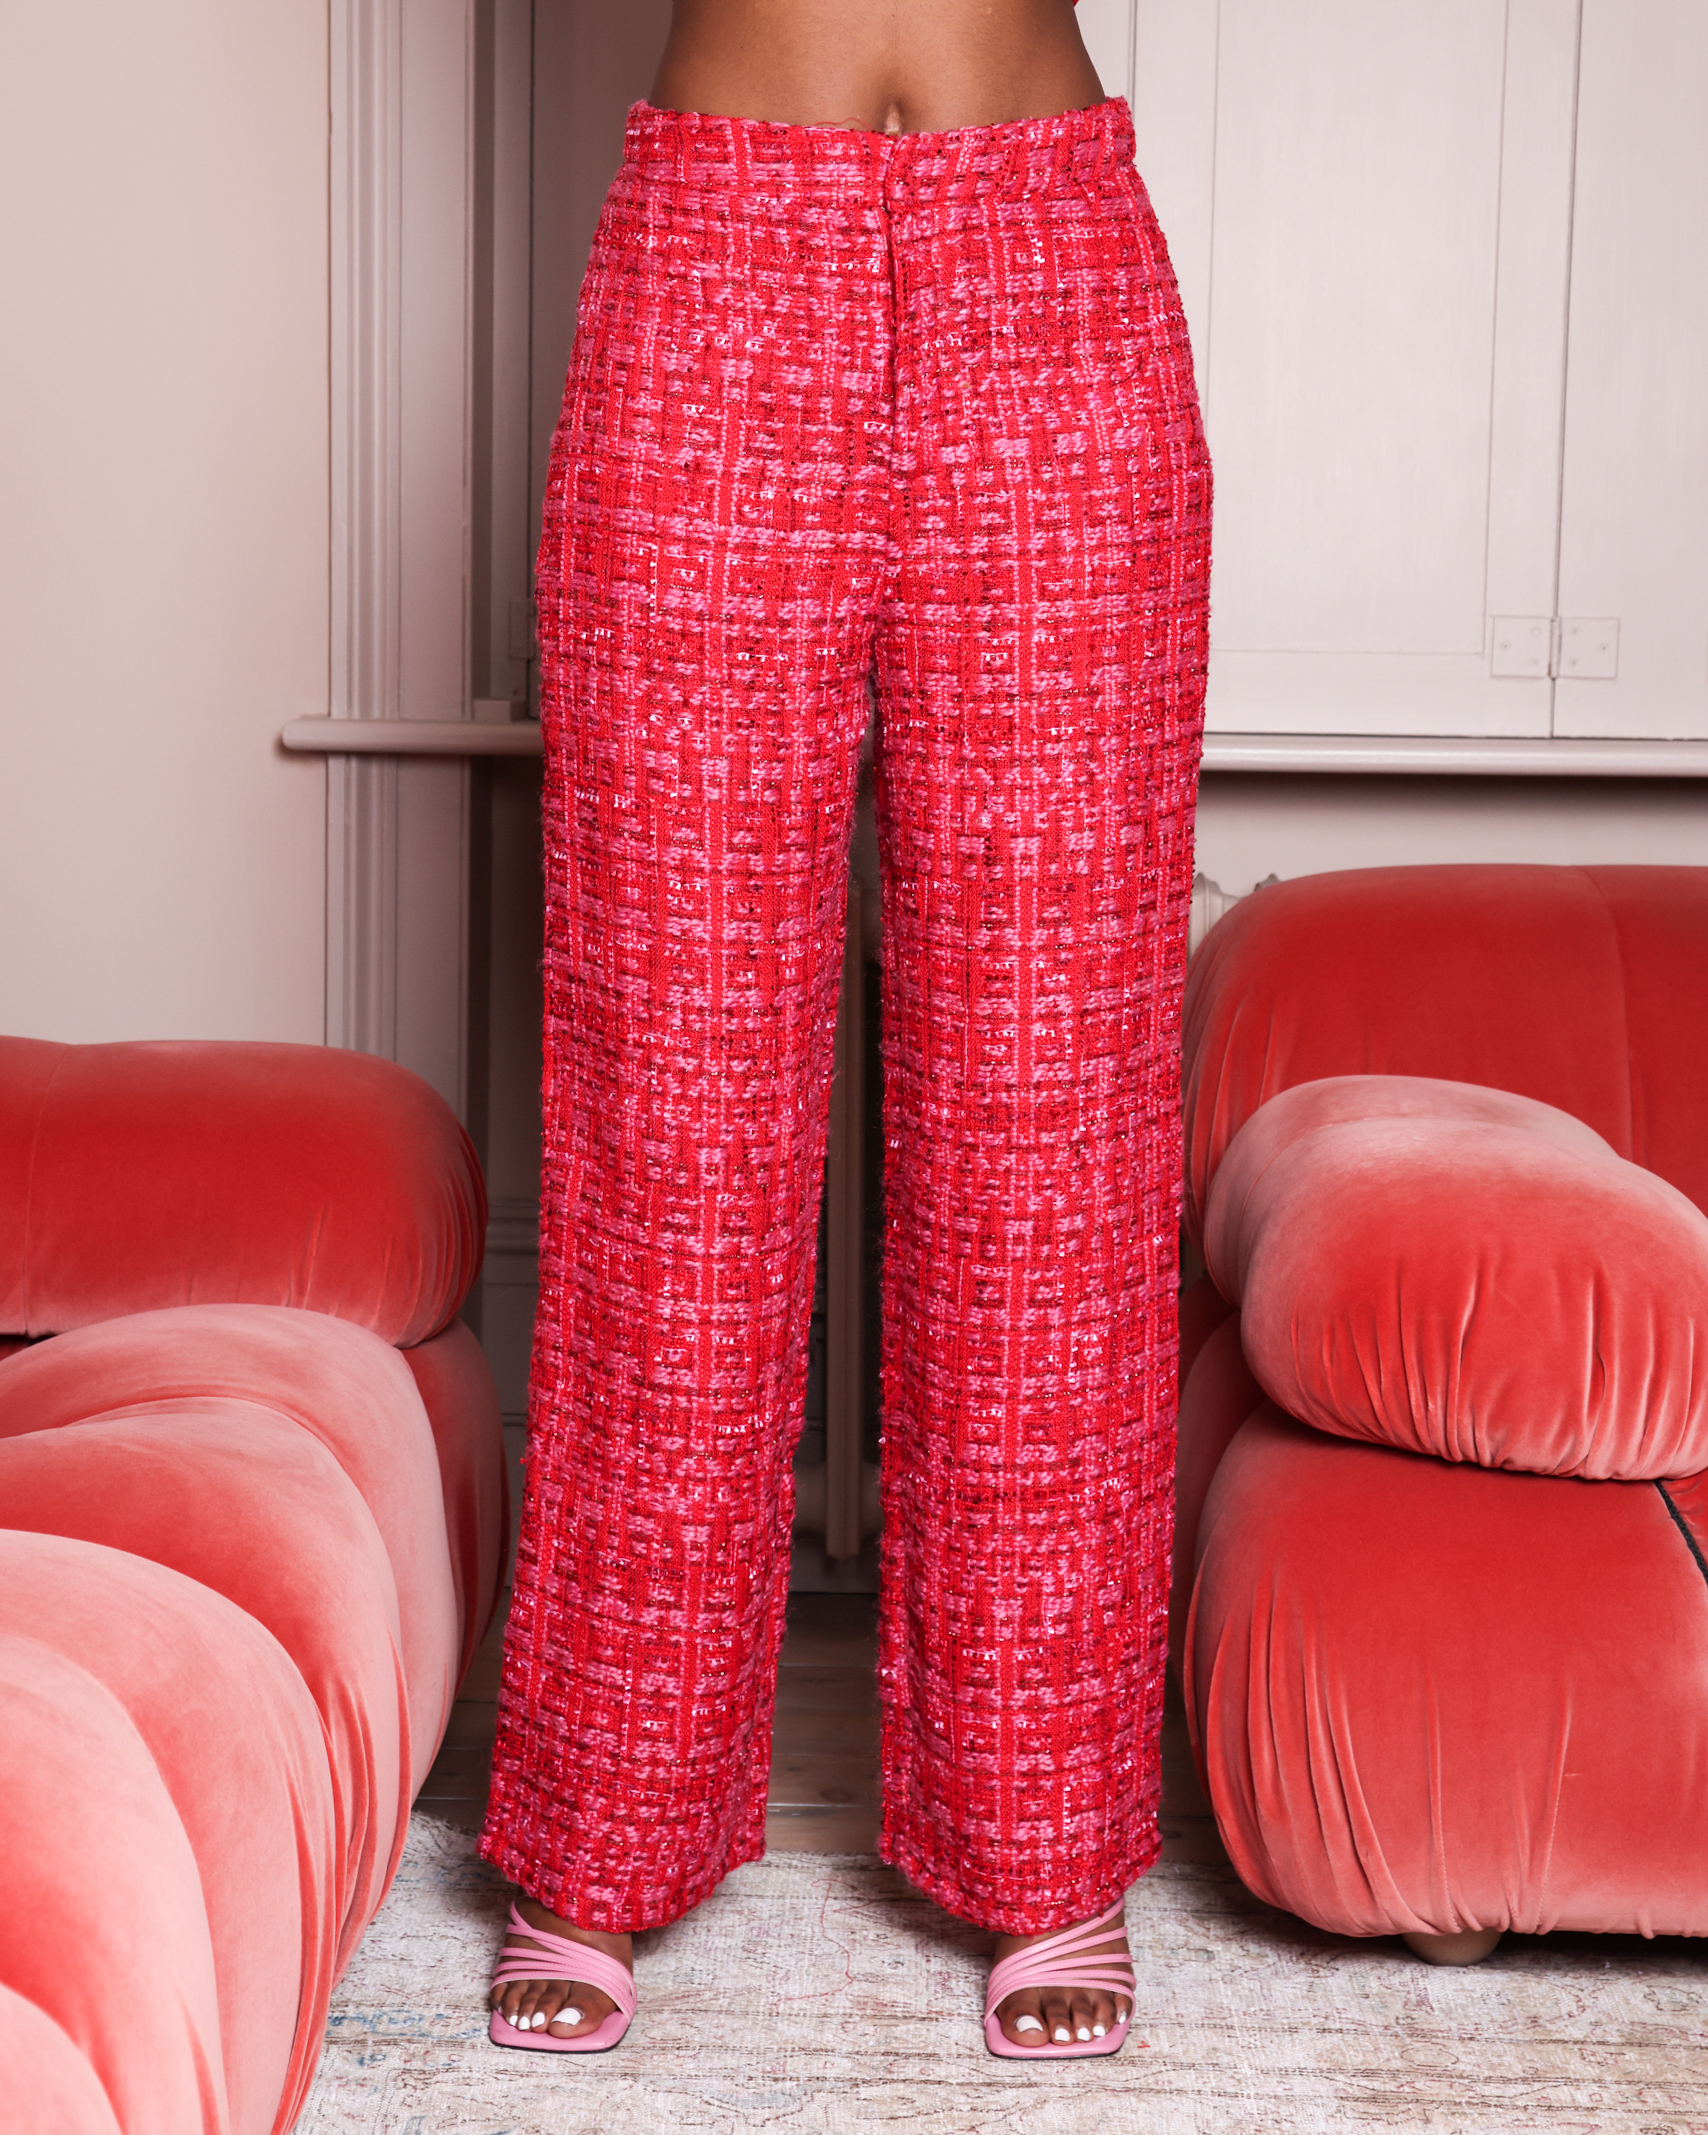 Penny Ponte Wide Leg Trouser  Red  WYSE London